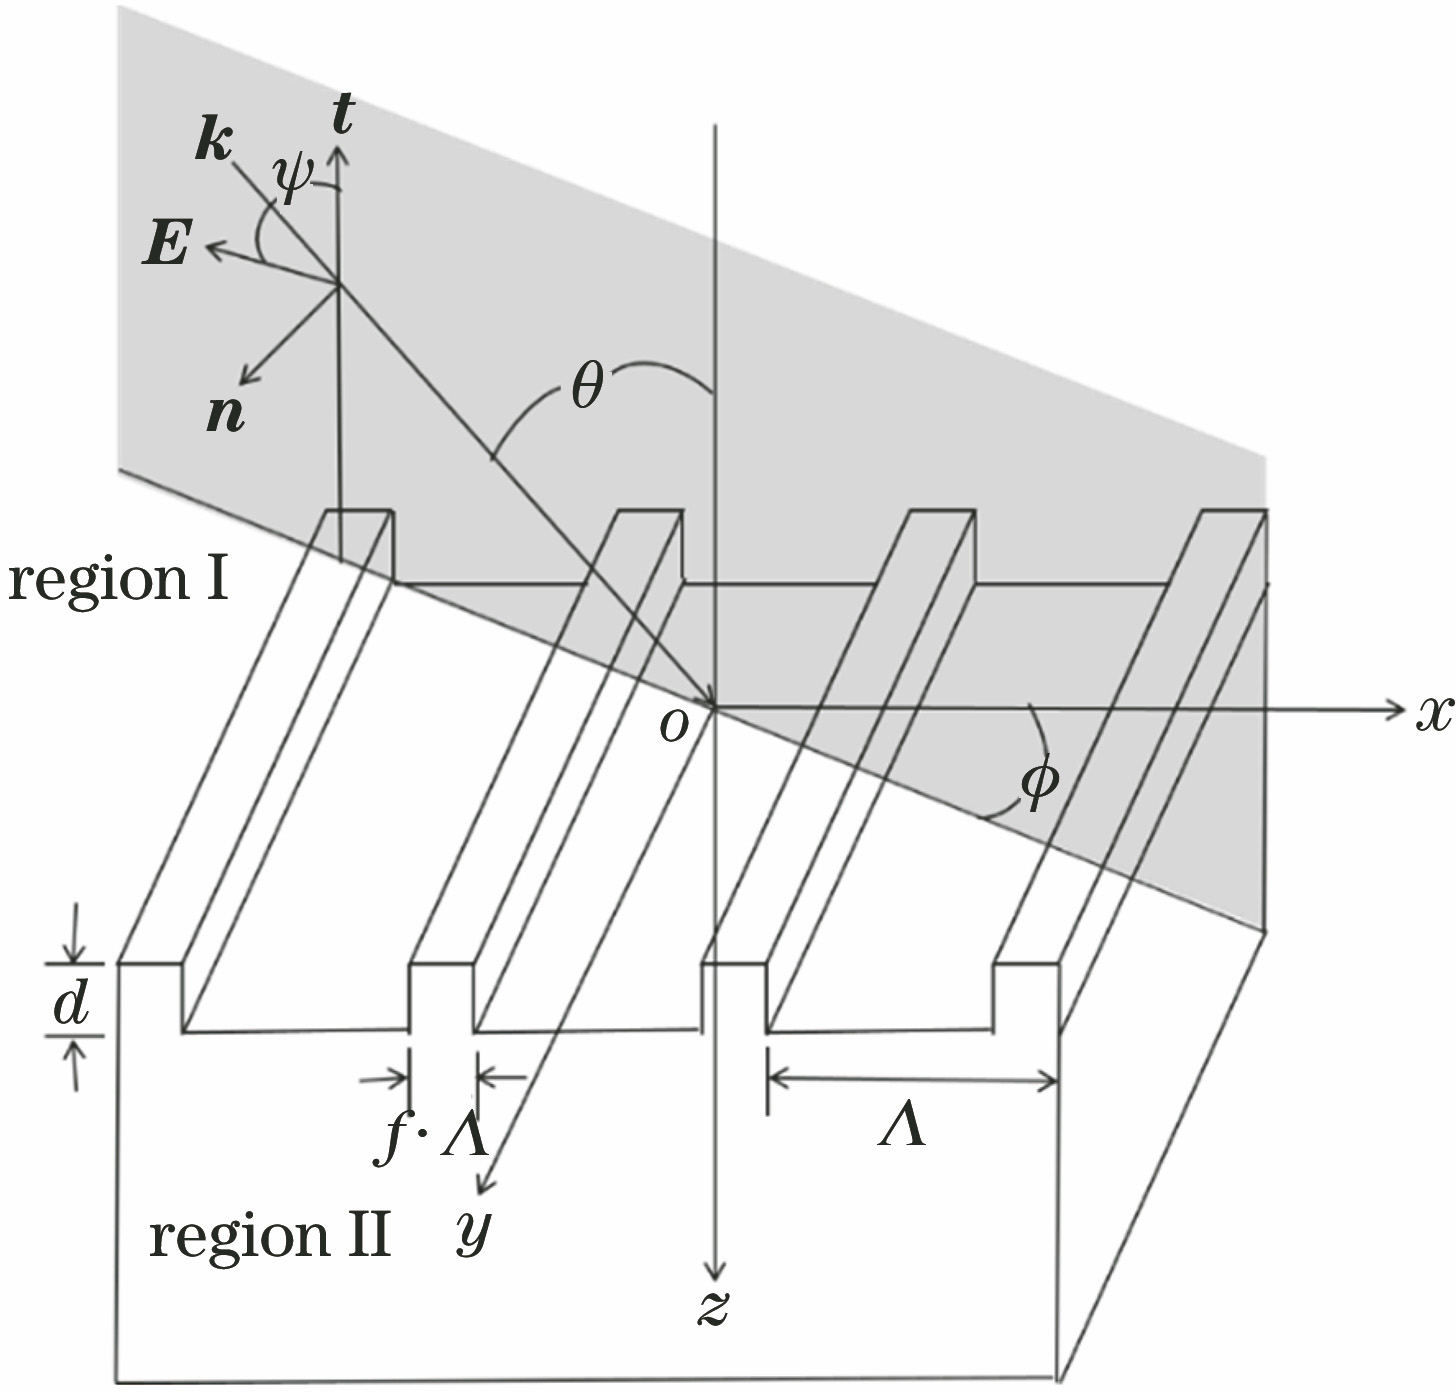 Schematic diagram of one-dimensional SWG